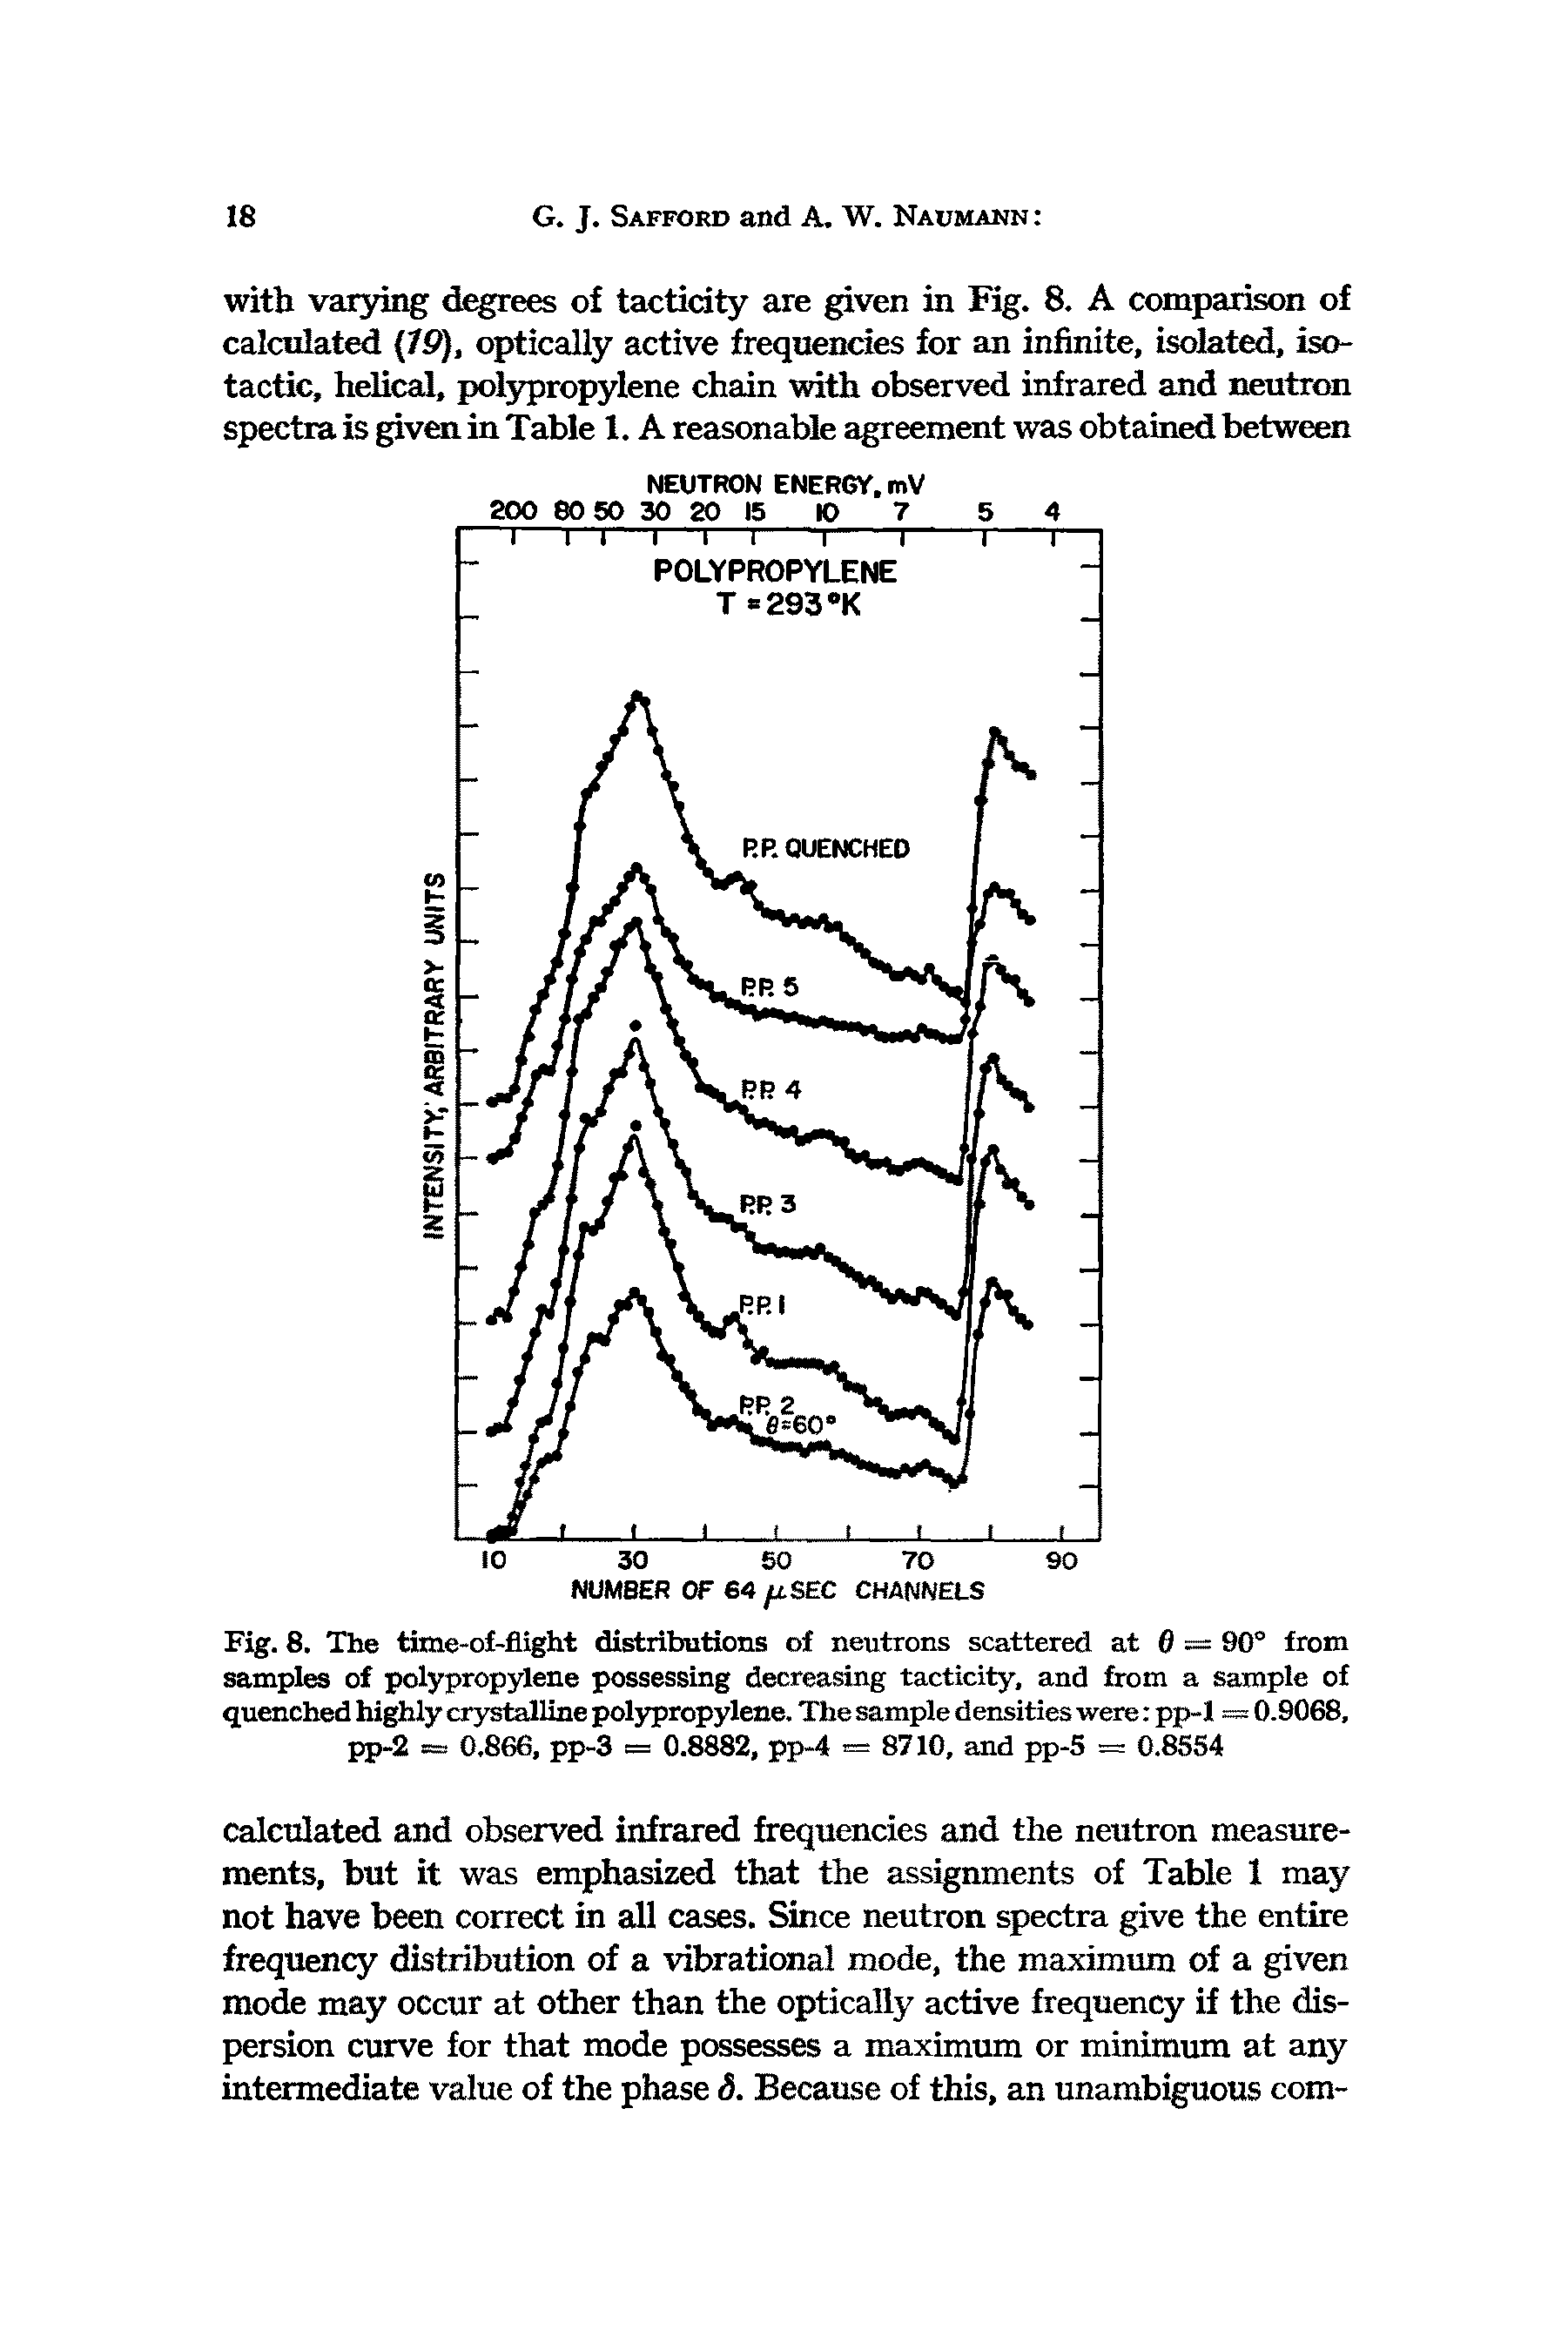 Fig. 8. The time-of-flight distributions of neutrons scattered at 0 = 90° from samples of polypropylene possessing decreasing tacticity, and from a sample of quenched highly crystalline pol3 propylene. The sample densities were pp-1 = 0.9068, pp-2 = 0.866, pp-3 = 0.8882, pp-4 = 8710, and pp-5 = 0.8SS4...